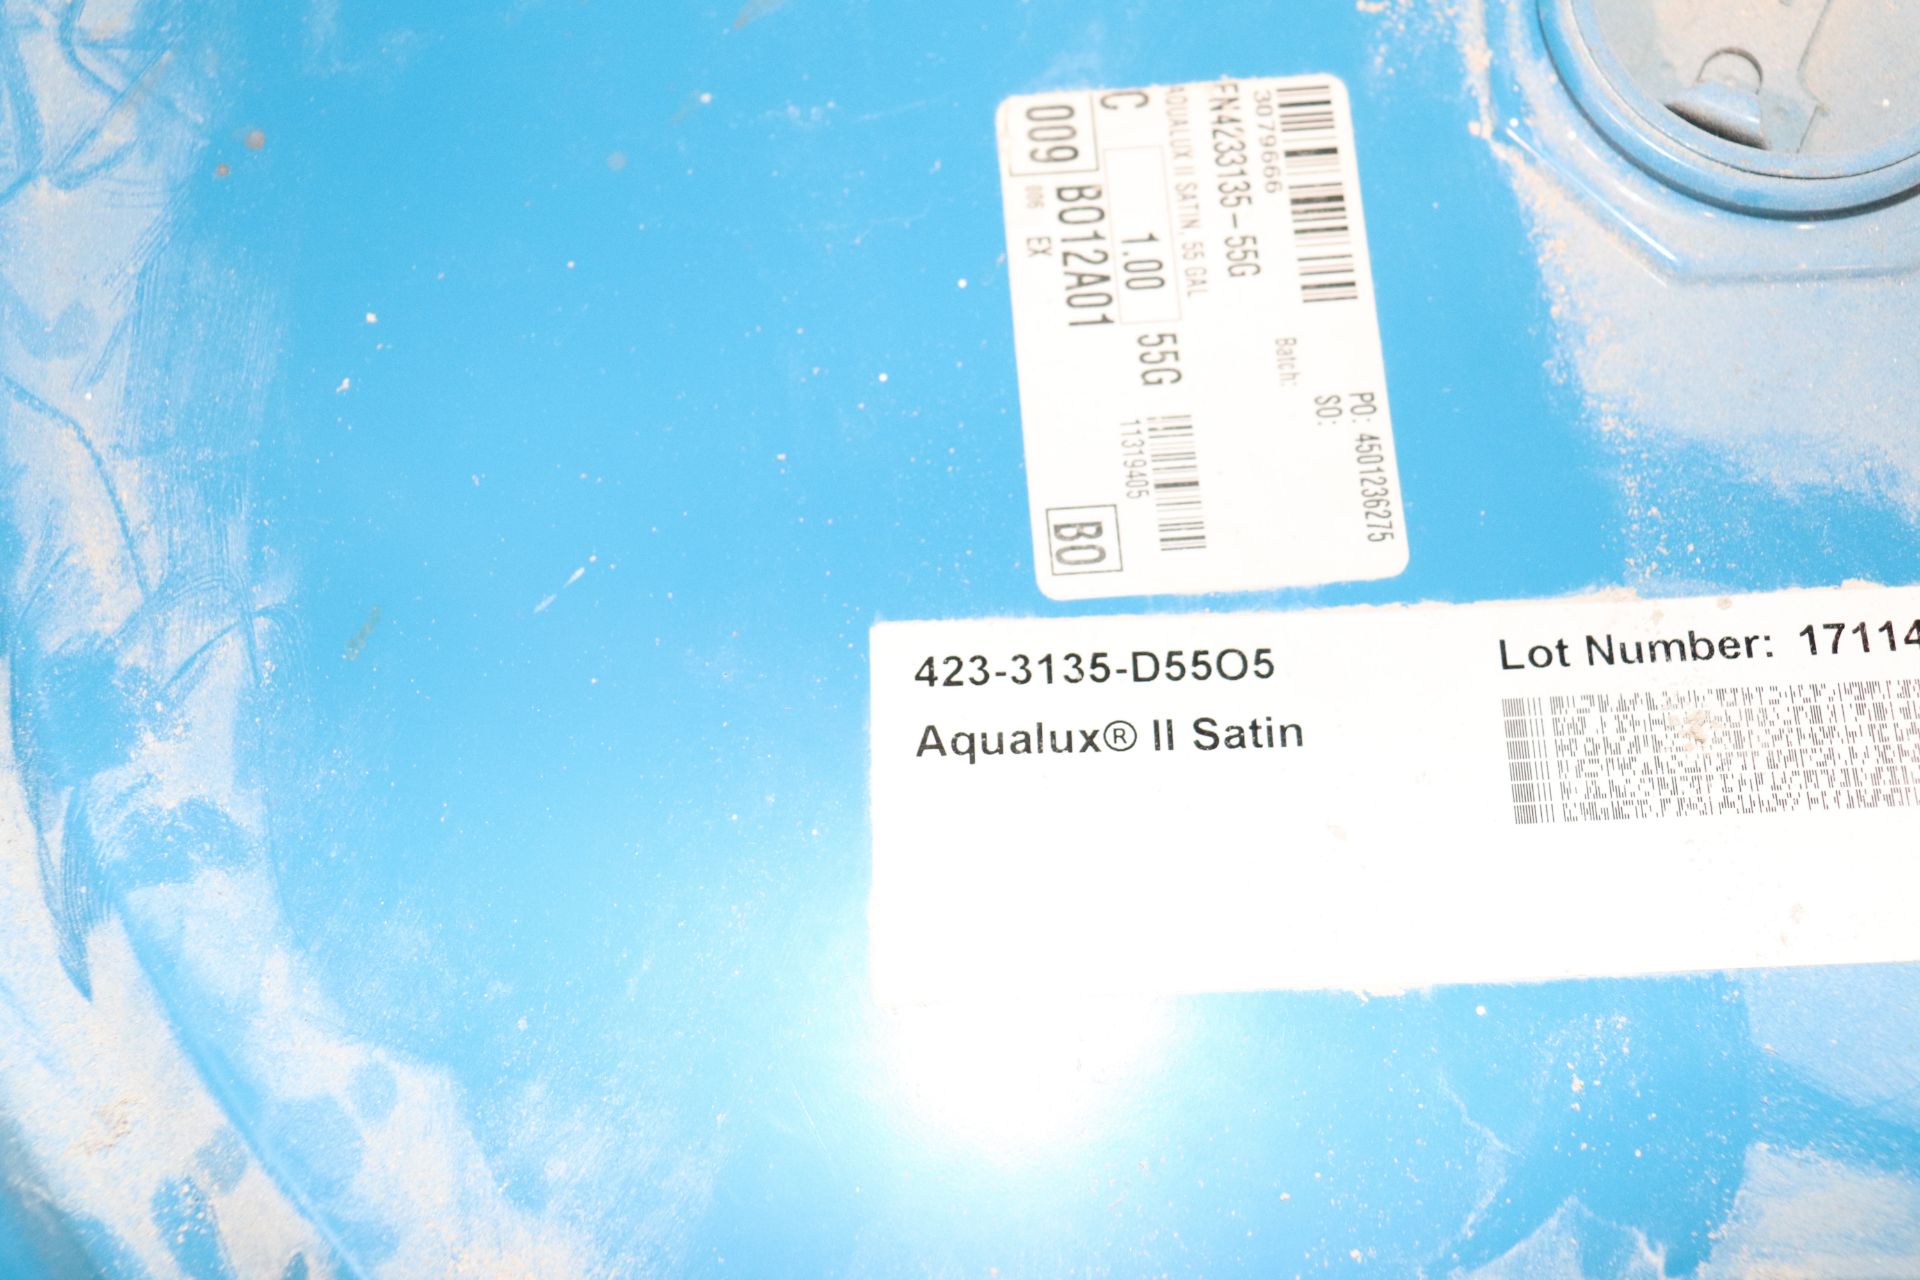 Two 55-gallon drums of WB stain base and 1 barrel of Aqualux Satin 2, sealed - Image 4 of 4